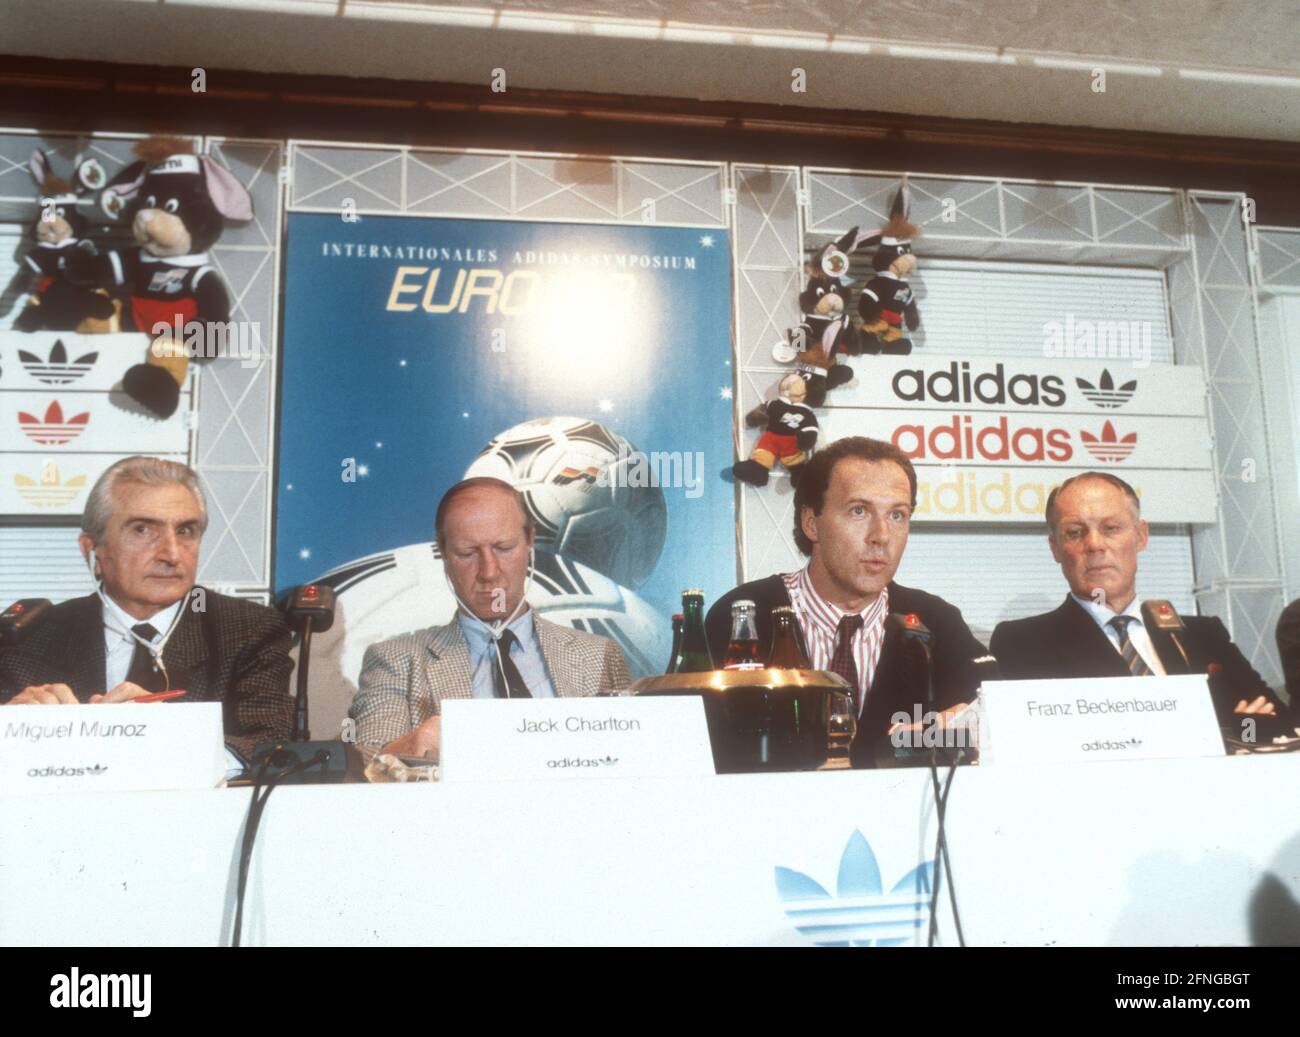 08.06.1988 Team manager Franz Beckenbauer (BR Germany) speaks at the  international Adidas Symposium for the 1988 European Championship. from  left . Miguel Munoz , Jack Charlton, Beckenbauer and Rinus Michels  Copyright for